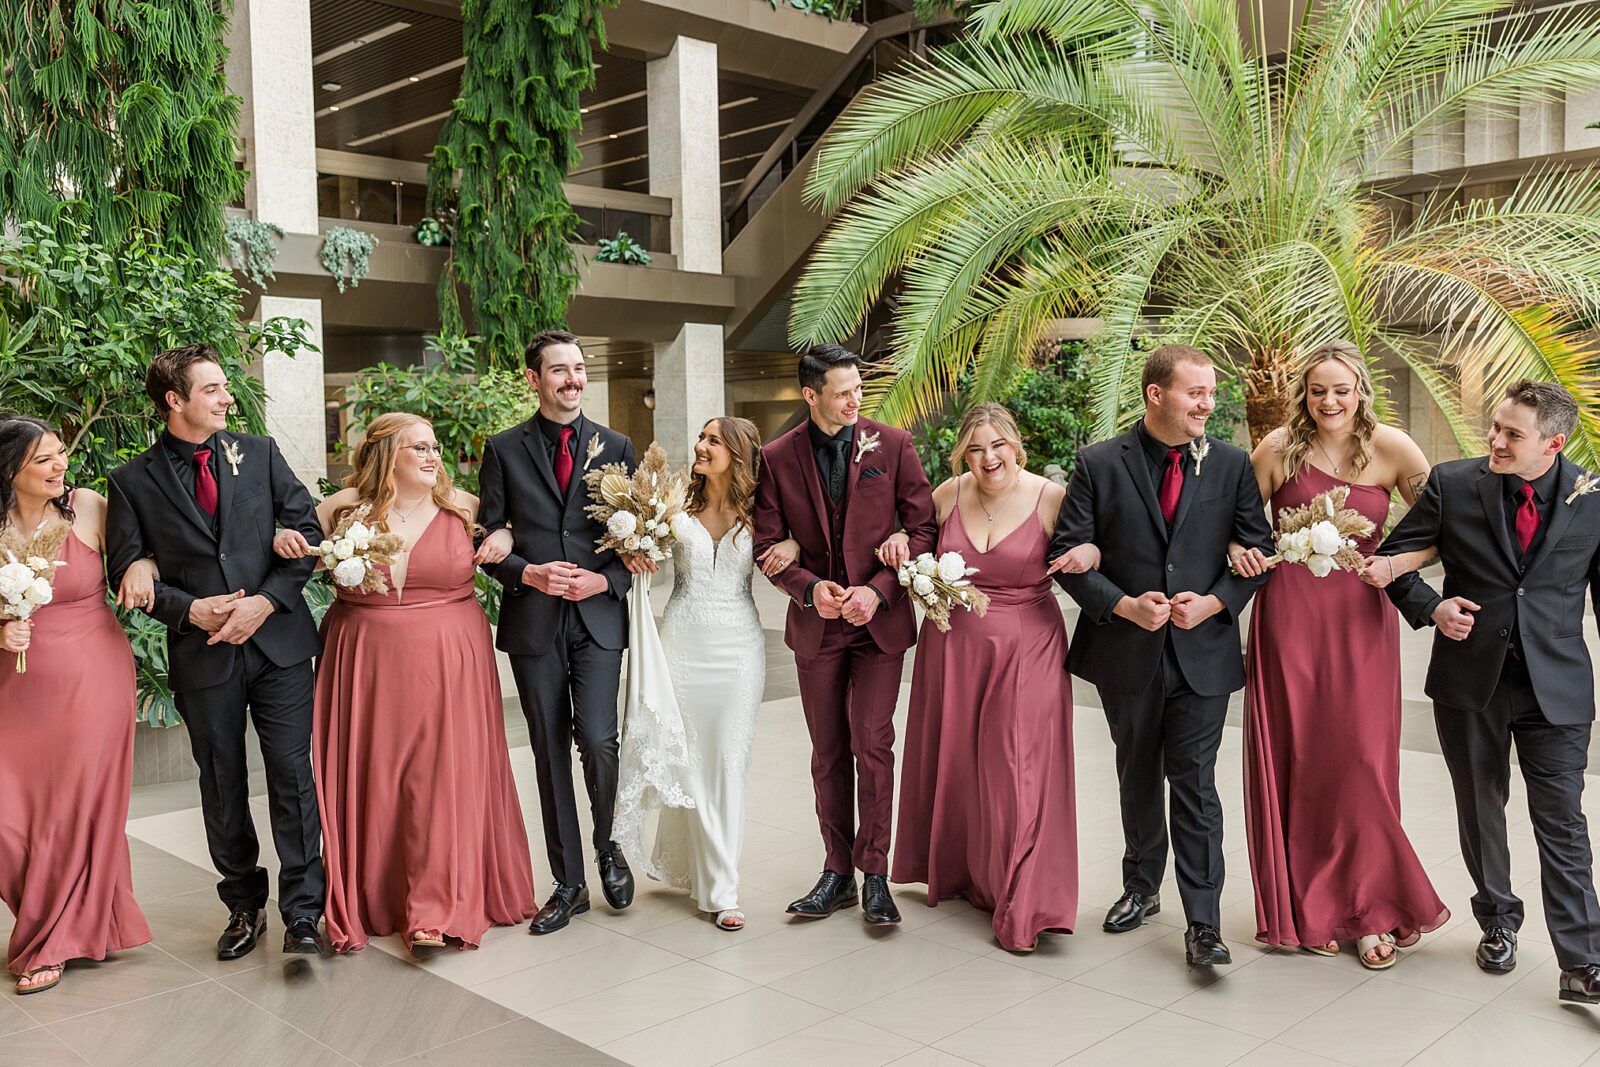 Wedding Party and Bride and Groom photos at the Mackenzie Art Gallery  in Regina, Sask